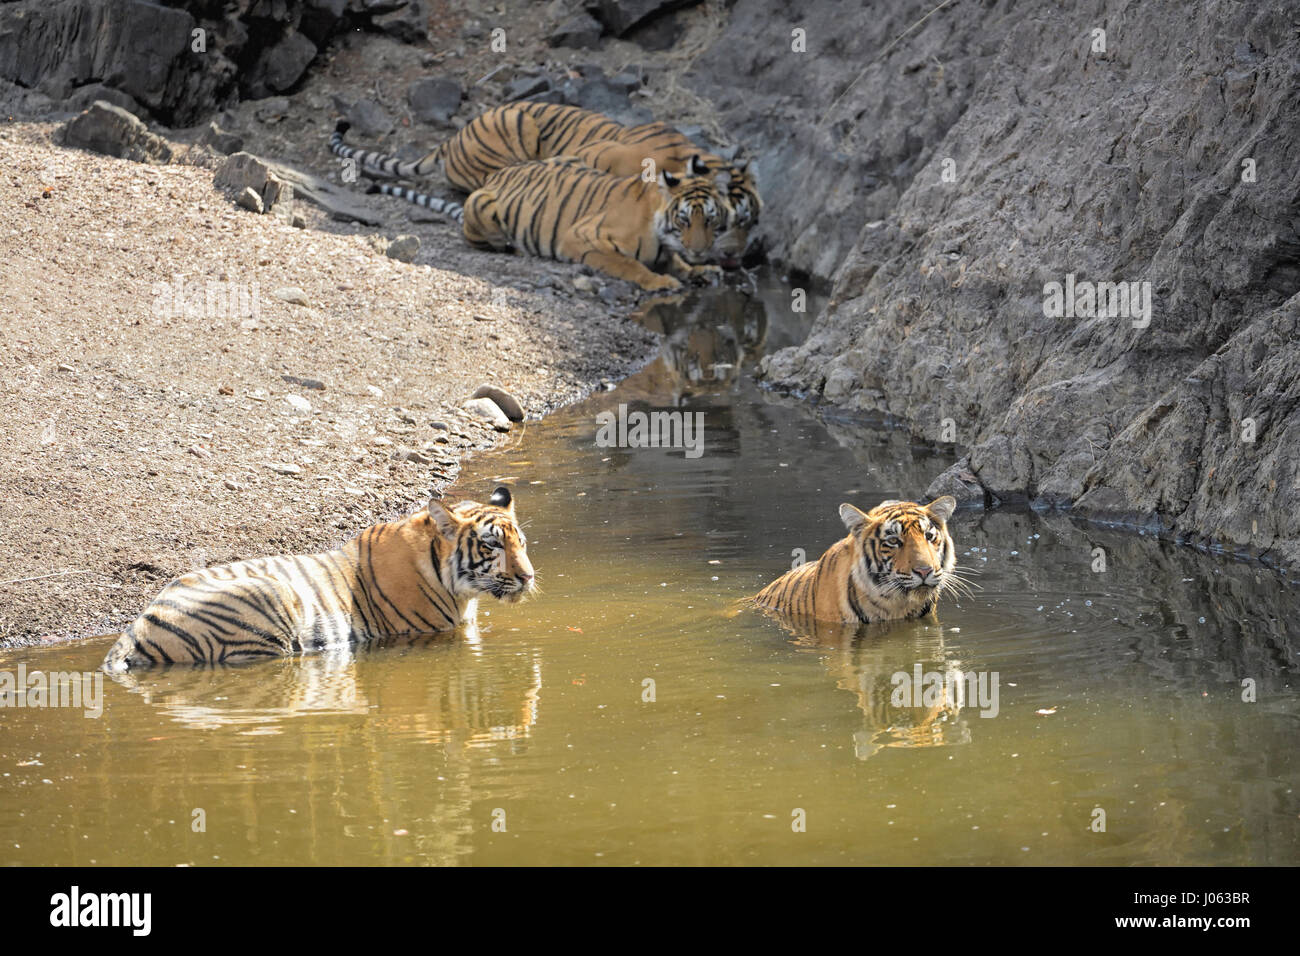 A family of four Bengal tigers, cooling off and drinking from a water hole in Ranthambore tiger reserve, India, during the hot and dry summers. Stock Photo